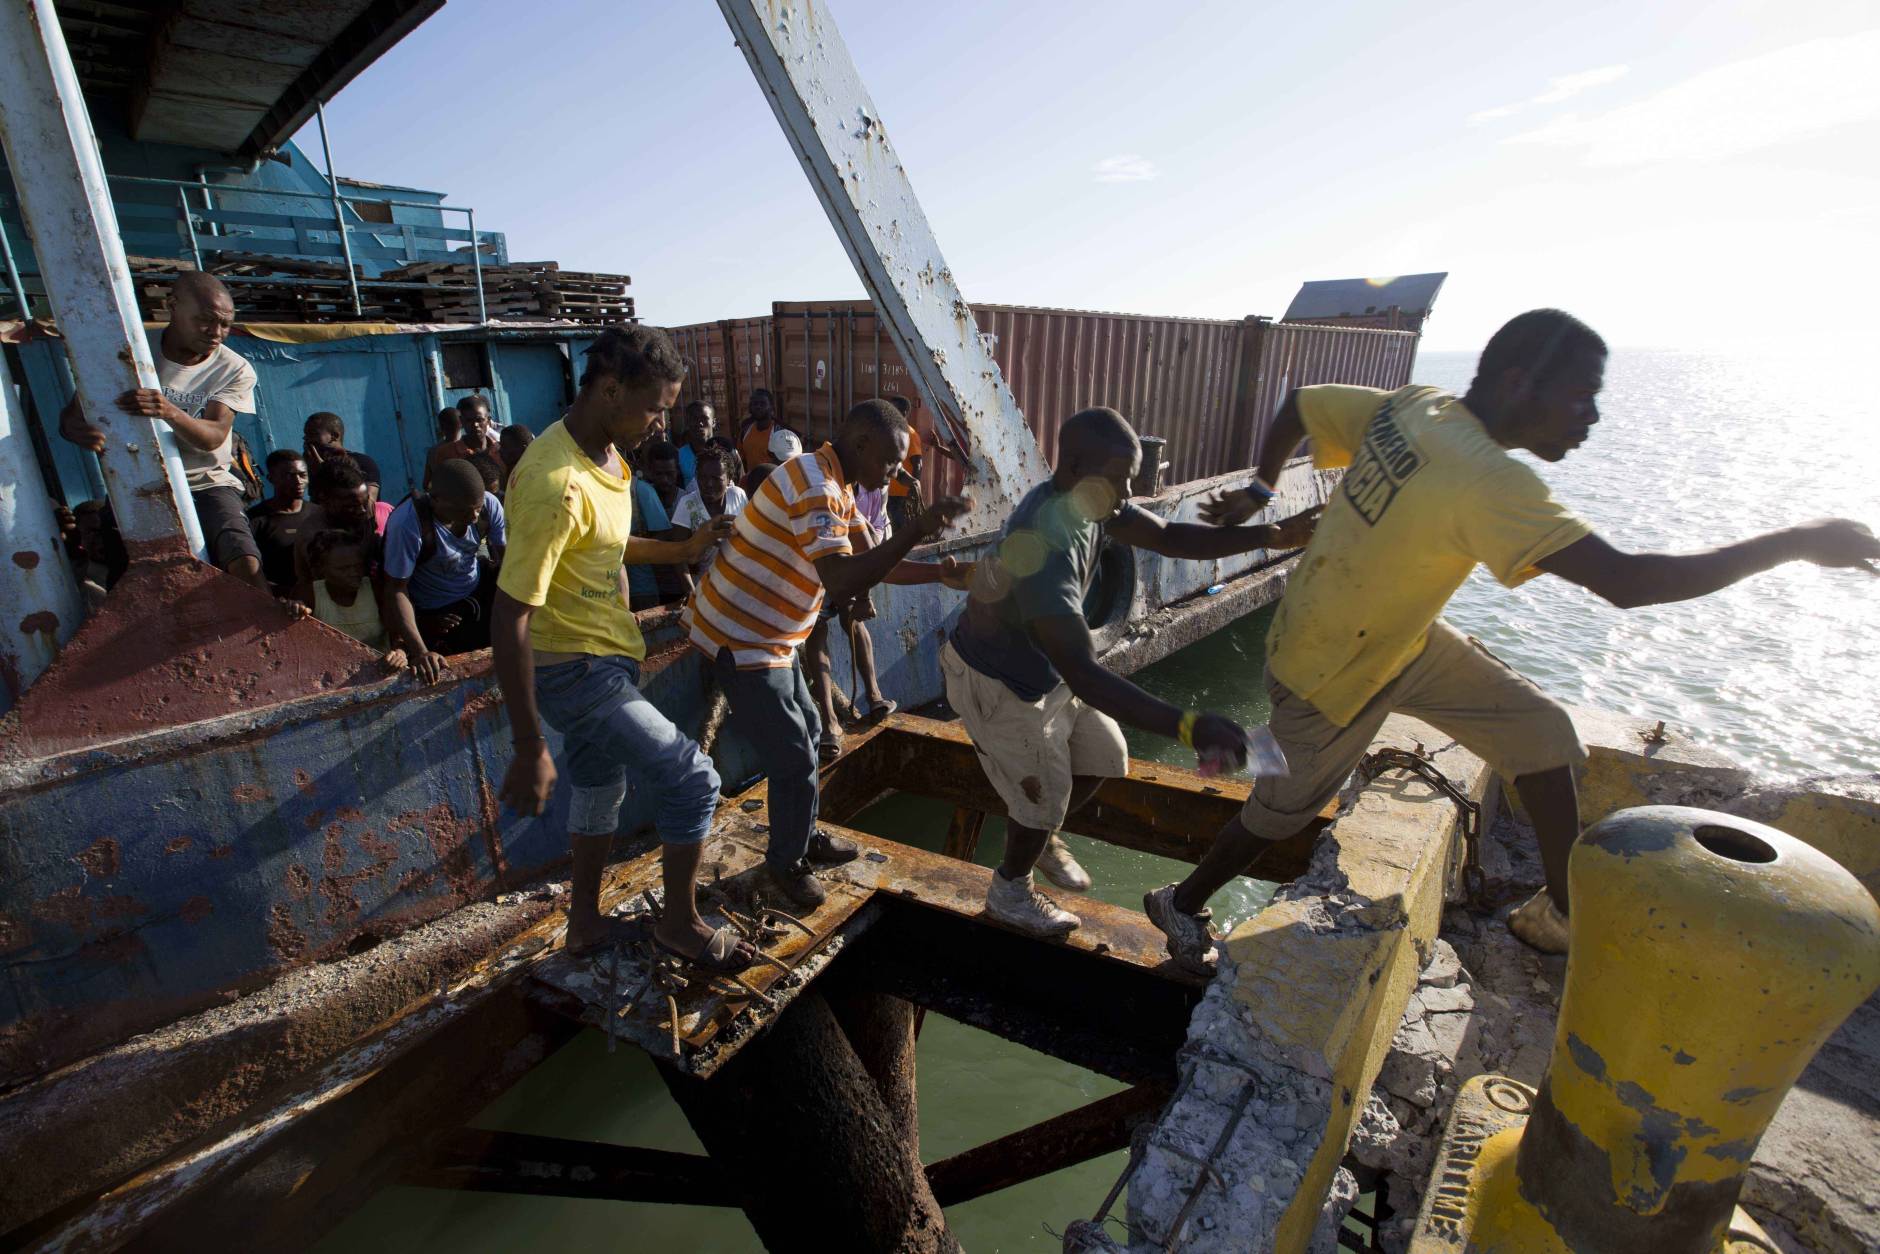 People try to get off a boat carrying aid as national police arrive to secure the boat as it docks in Jeremie, Haiti, Wednesday, Oct. 12, 2016, in the aftermath of Hurricane Matthew. The U.N. envoy for Haiti says the impoverished Caribbean nation is facing "a humanitarian tragedy and an acute emergency situation" with 1.4 million people needing immediate help. (AP Photo/Dieu Nalio Chery)